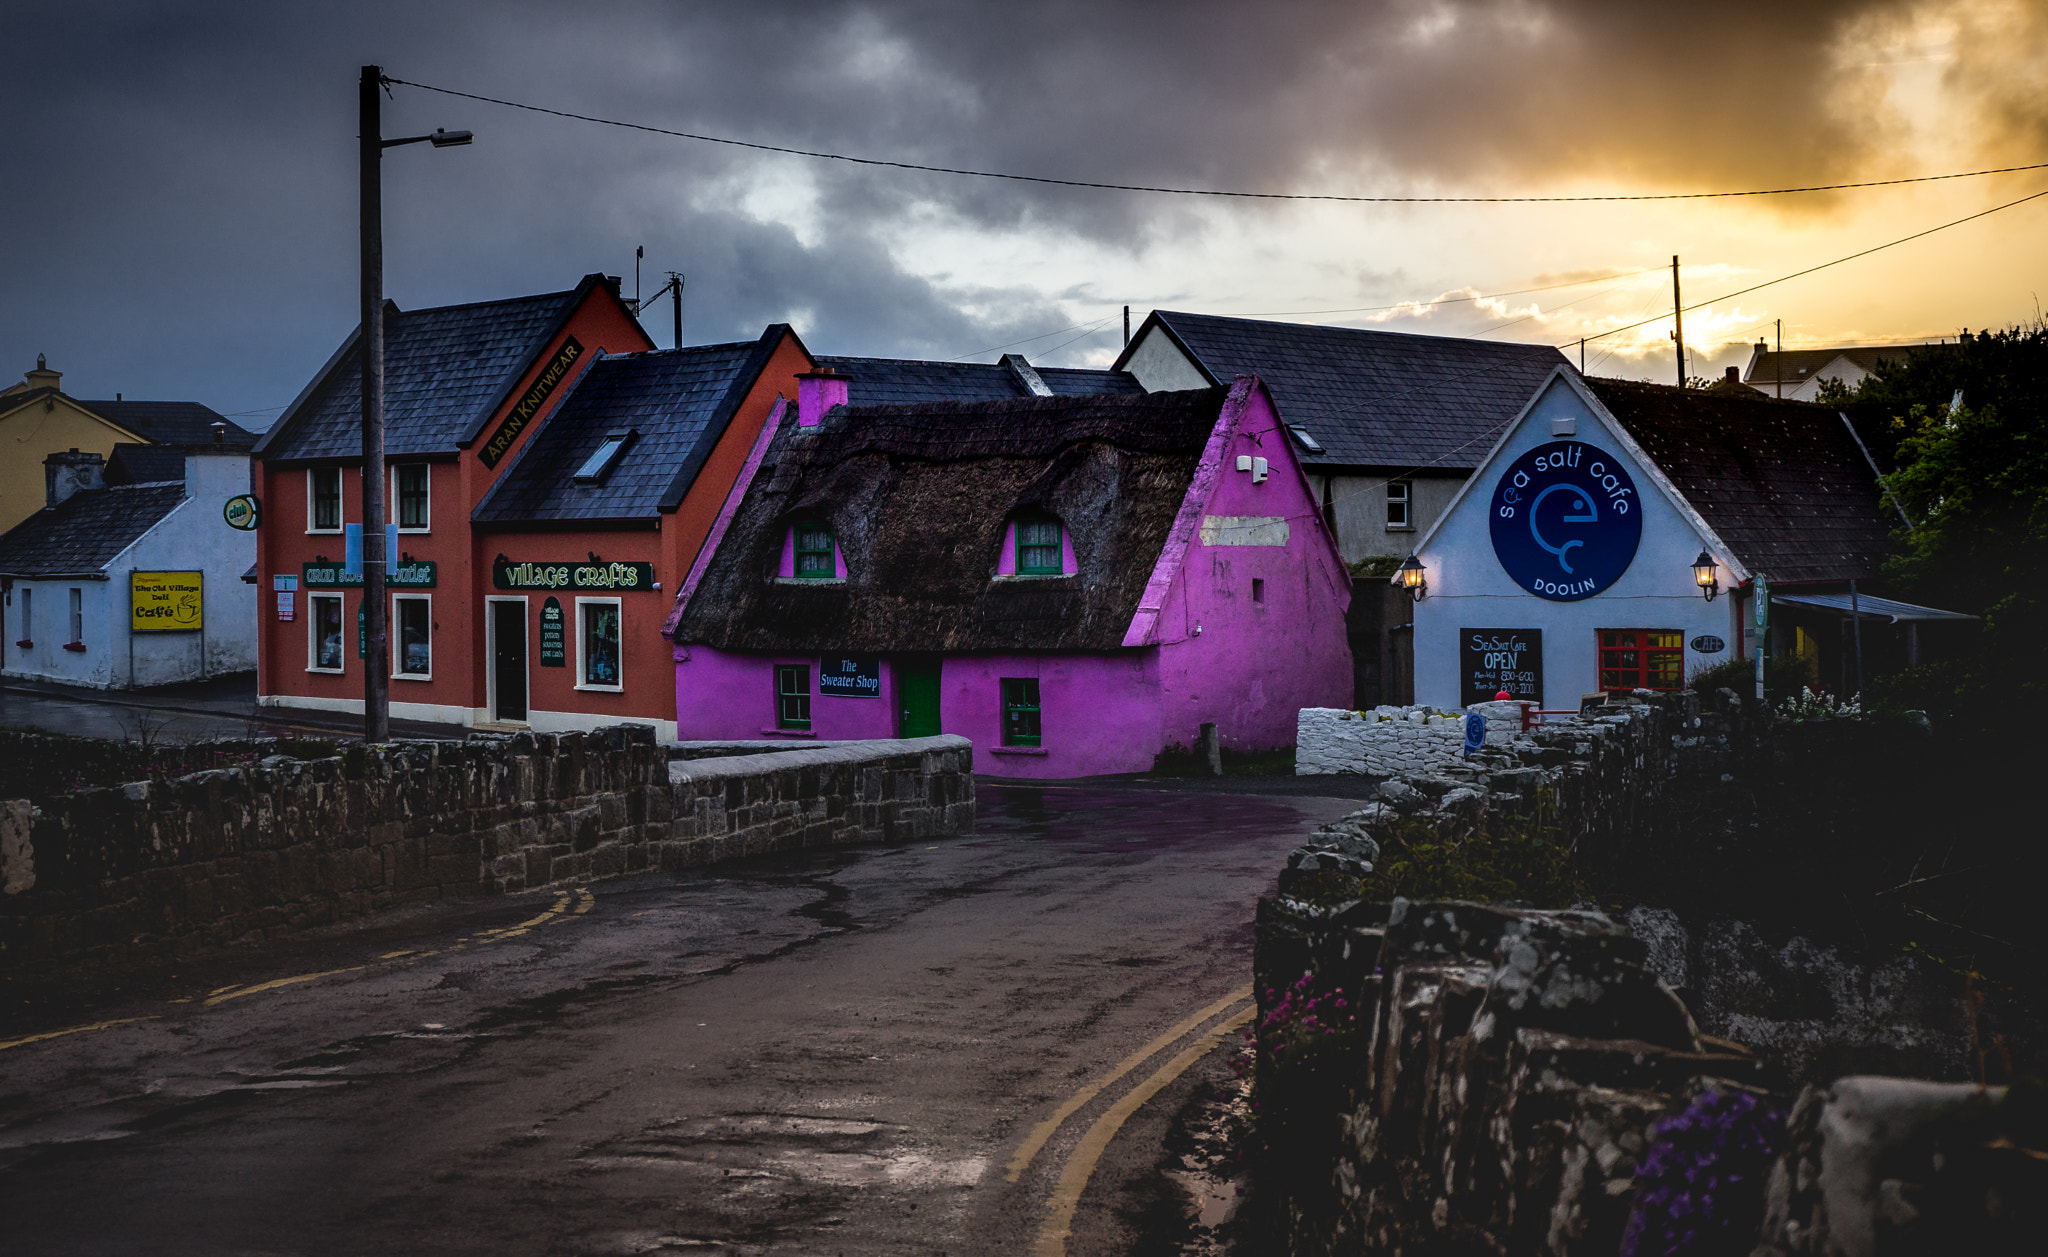 Sony a7 + Tamron 18-270mm F3.5-6.3 Di II PZD sample photo. Fishing village in ireland photography